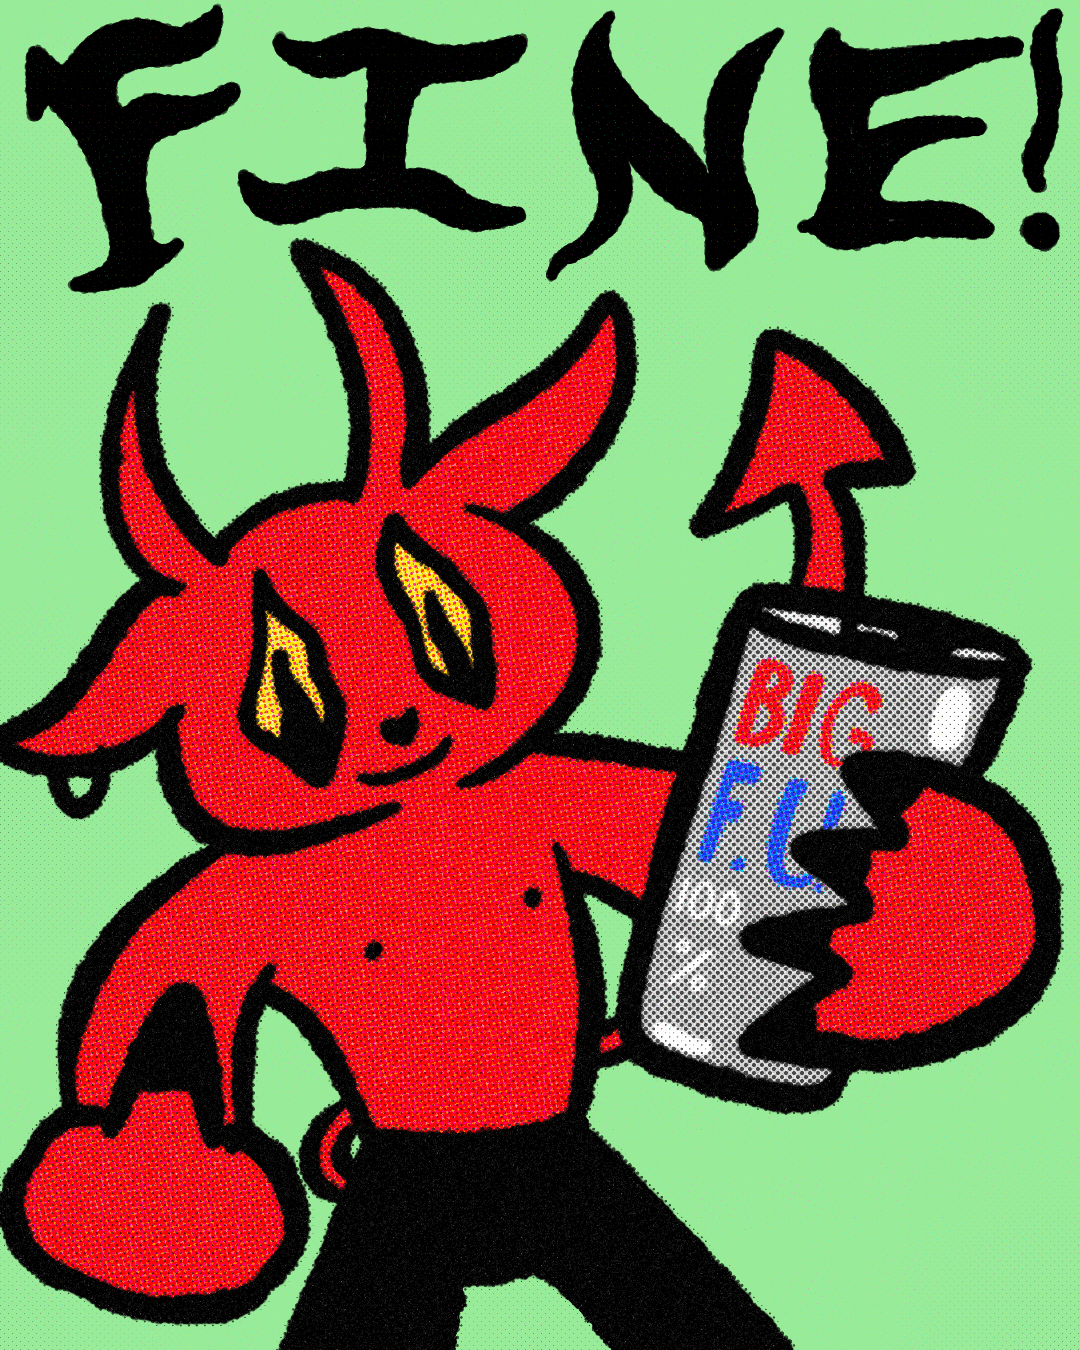 An illustration of a red devil character known as 'Billup'. He is giving the finger while holding a tall can of 'BIG F.U. 100%' on a green background with text above him saying 'Fine!'. He looks happy.